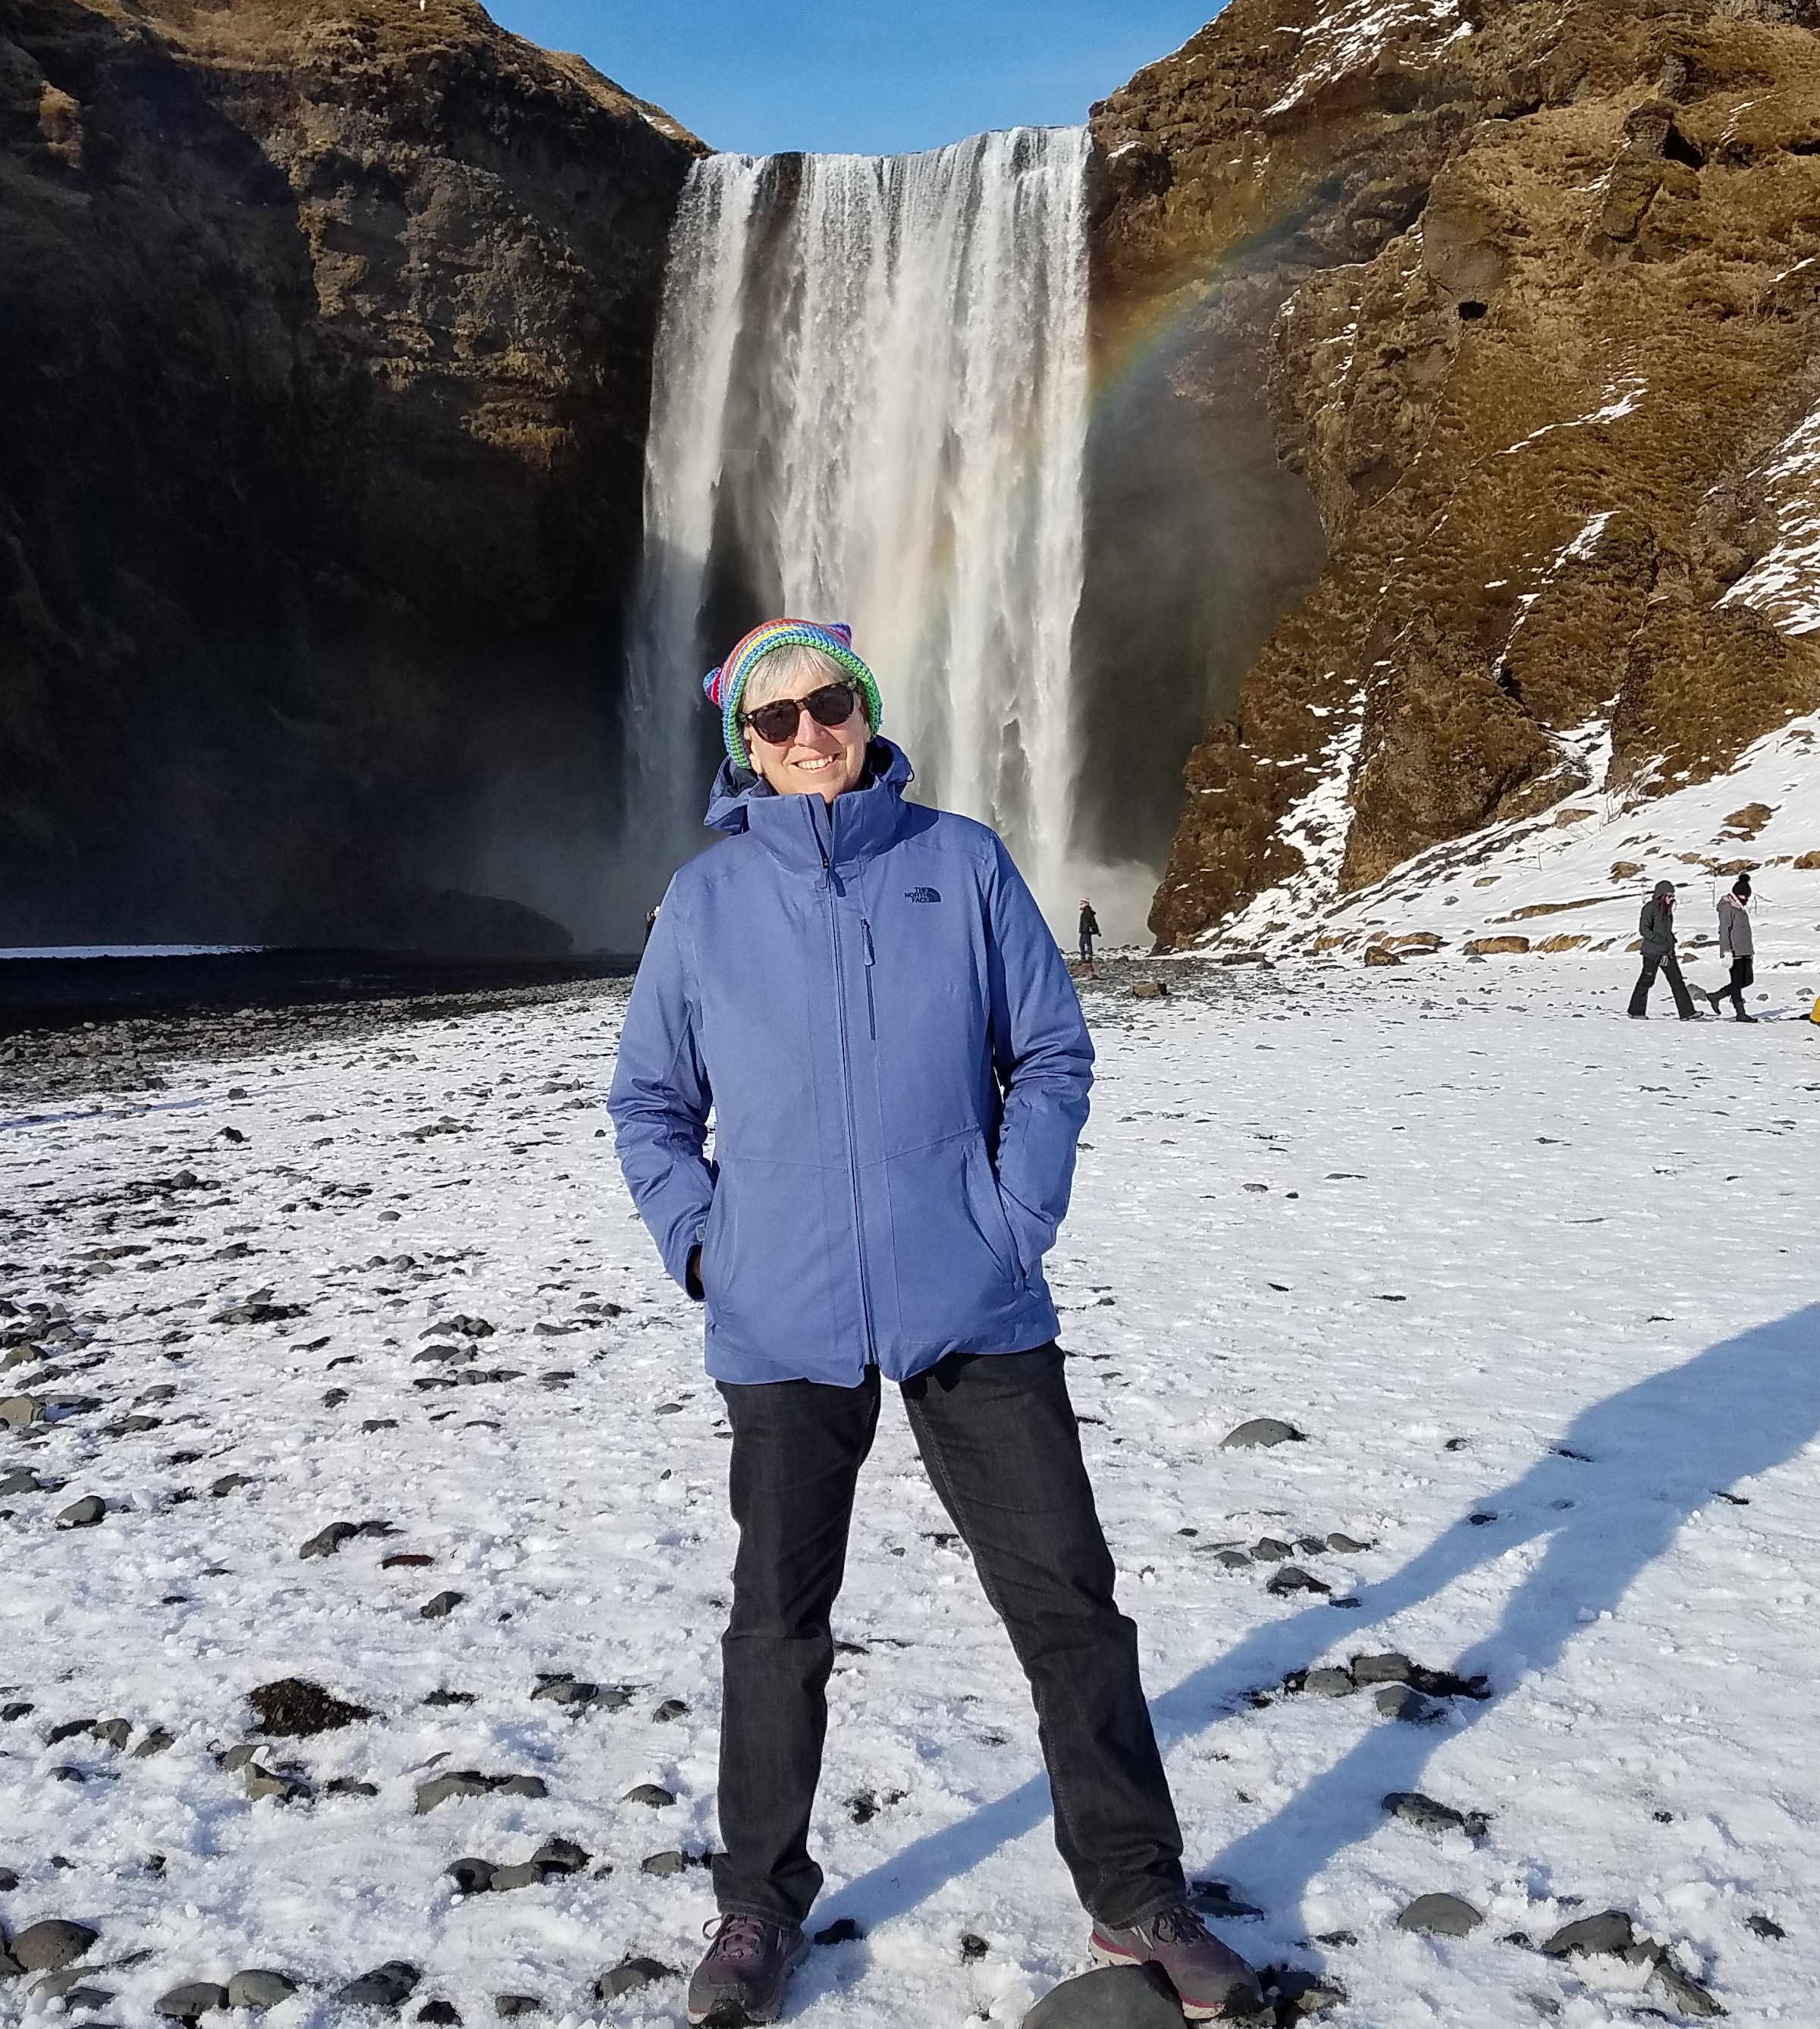 "Laura in front of a water fall standing on snow"